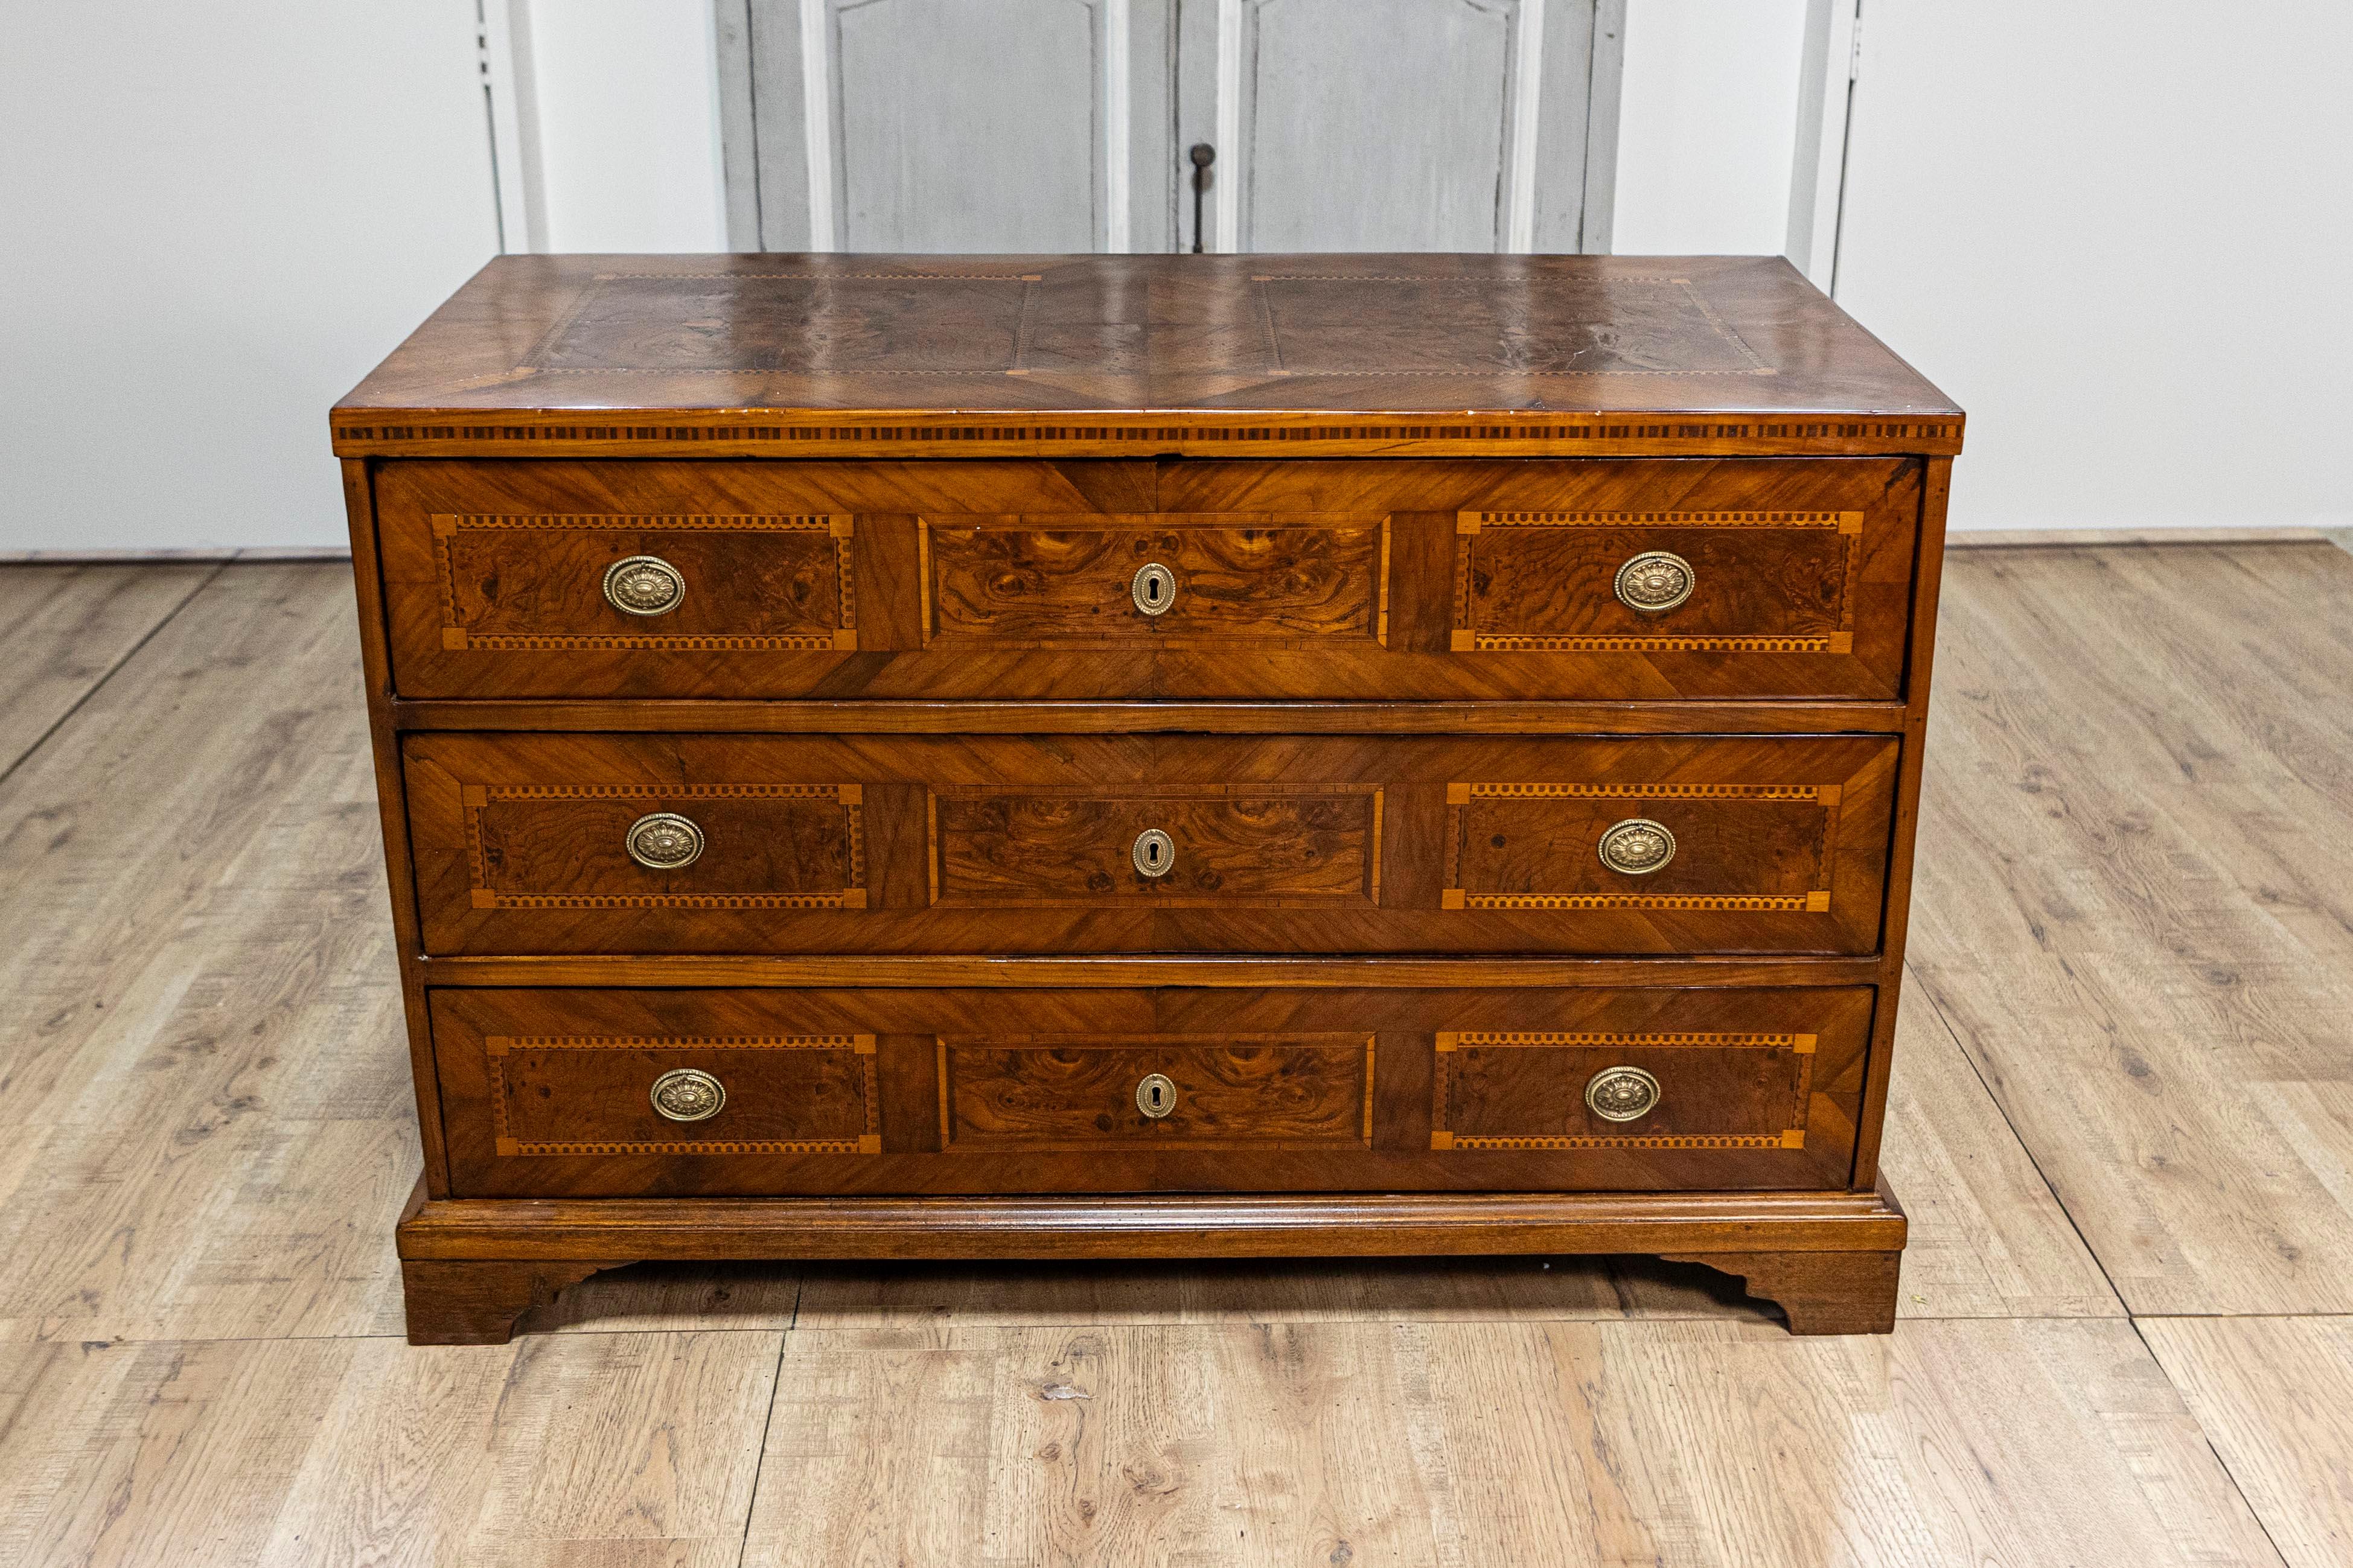 An Italian walnut and mahogany commode from the 19th century with three drawers, inlay and bracket feet. This 19th-century Italian commode beautifully exemplifies classic craftsmanship with its rich walnut and mahogany construction. The commode